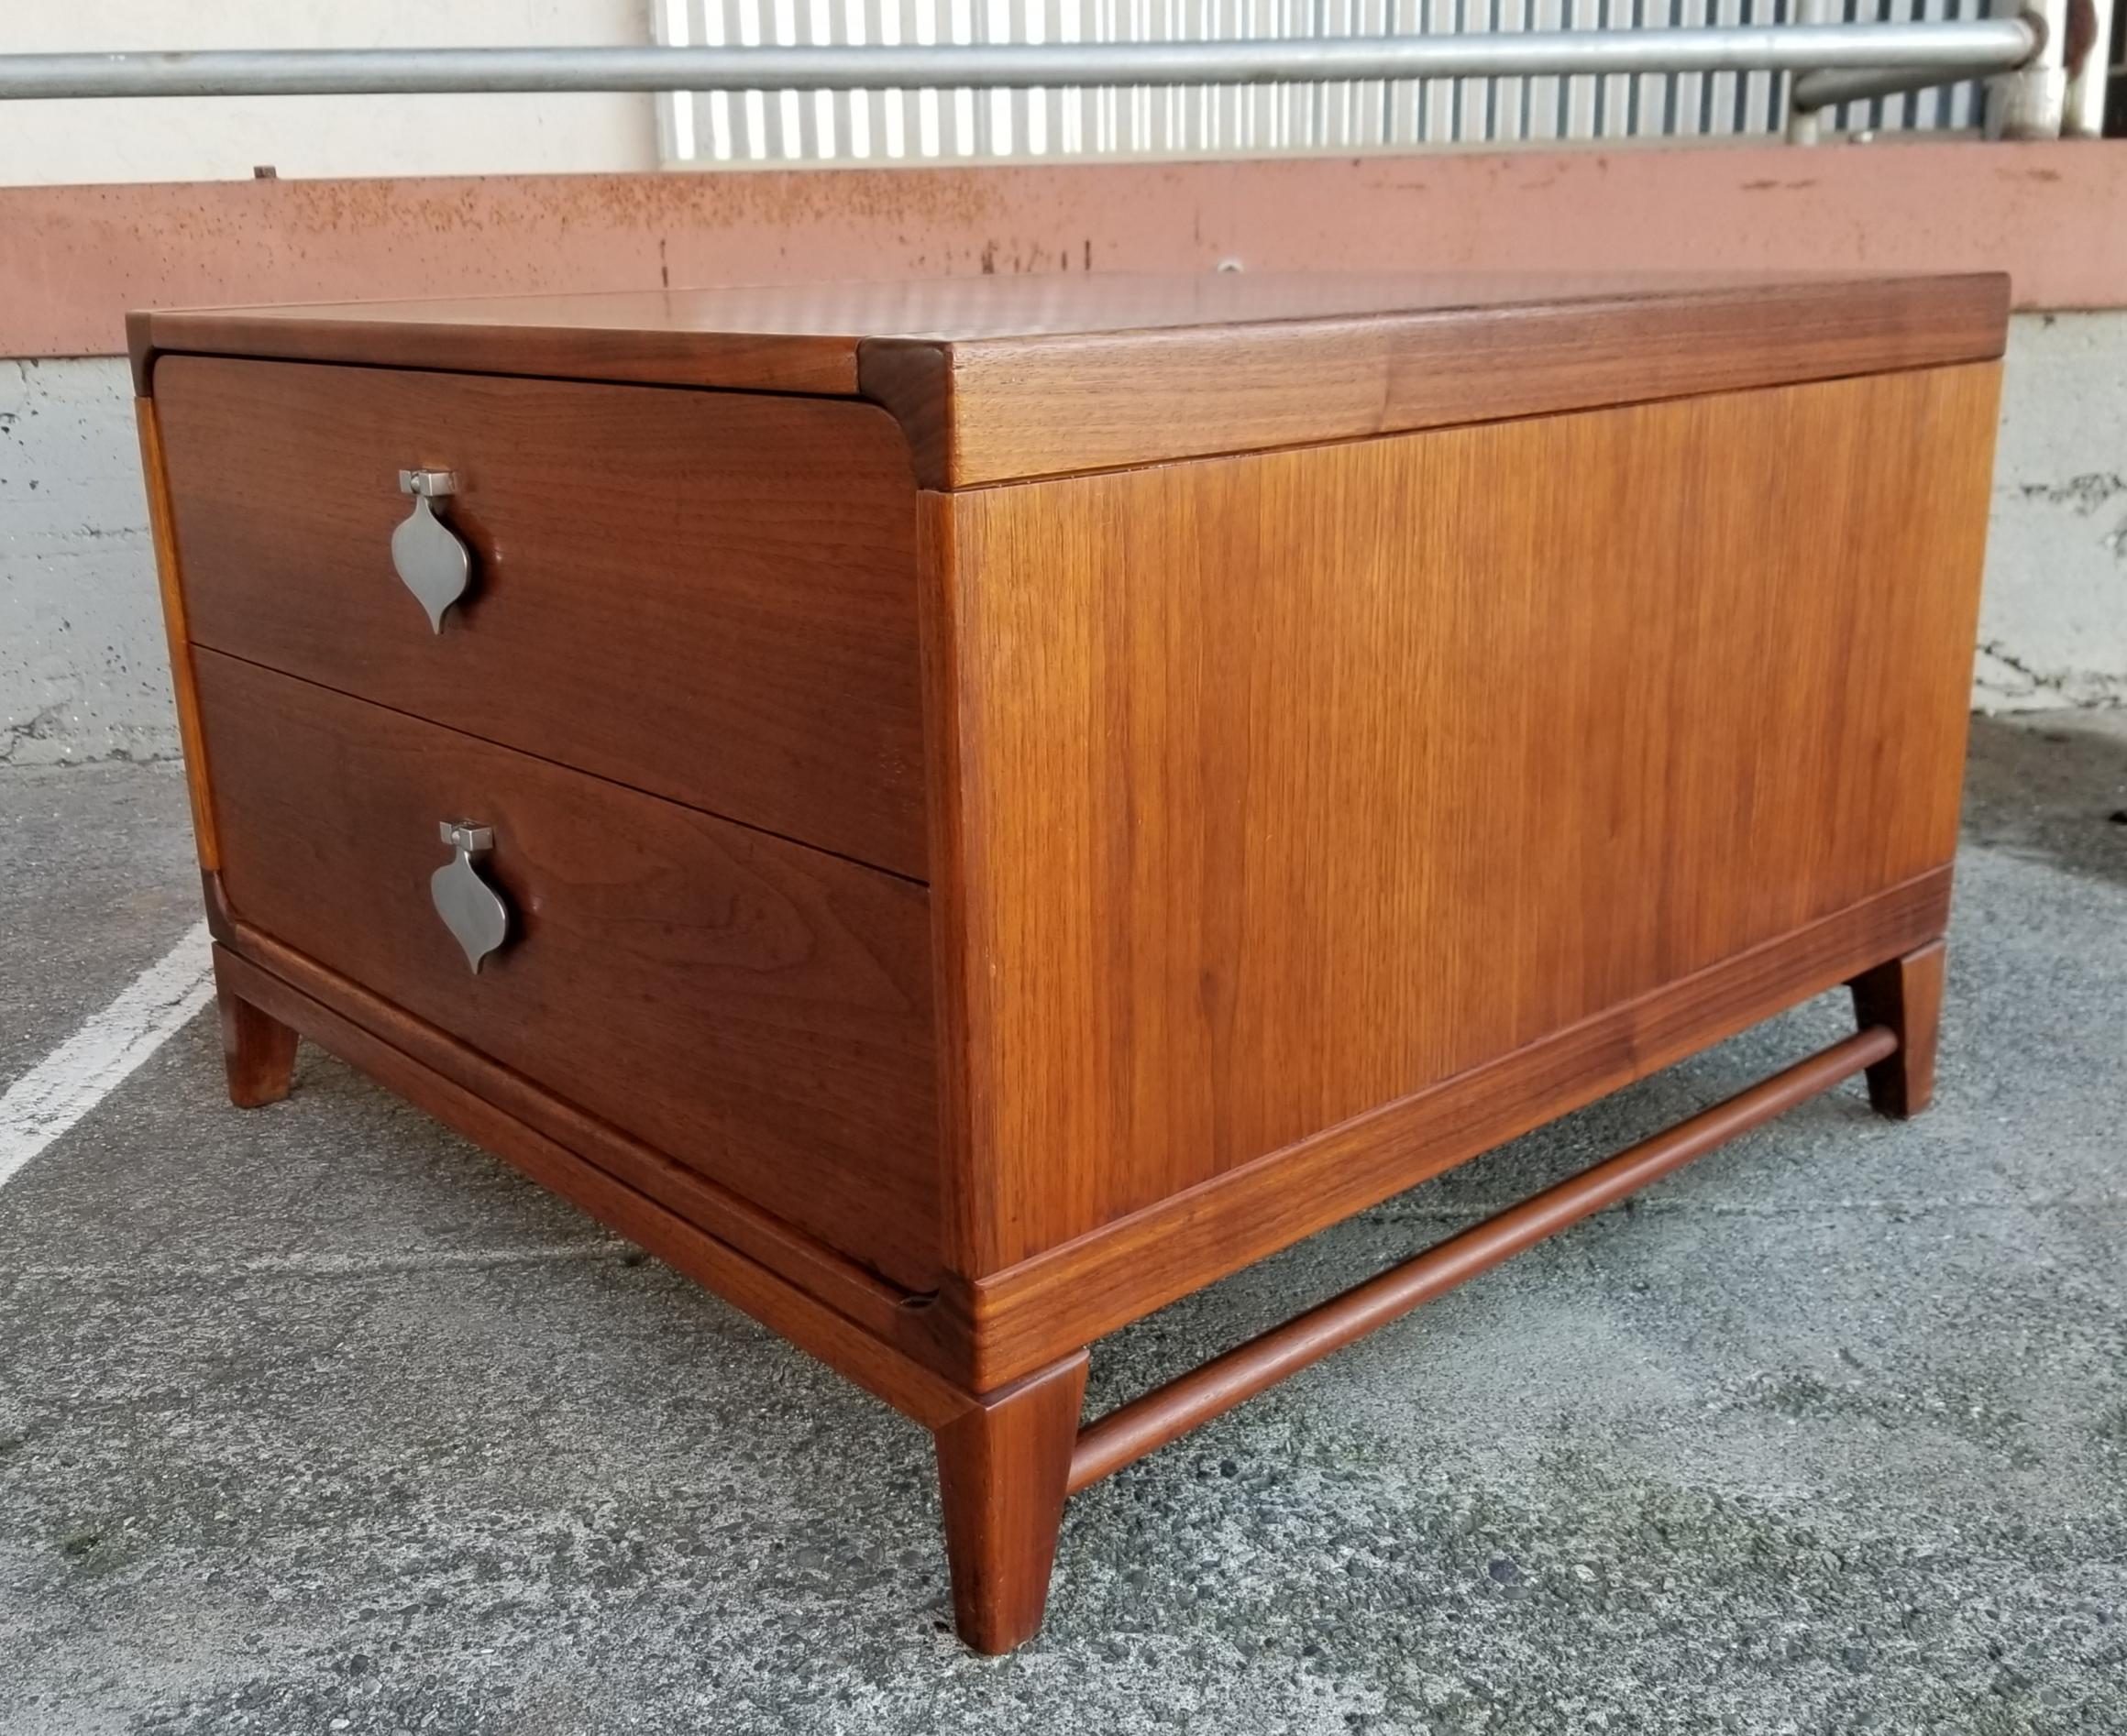 Mid-Century Modern square end table designed by John Keal for Brown-Saltman of California. Featuring 2 large drawers. Dovetail construction with solid oak secondary woods. Retains Brown-Saltman label. Very good original condition.